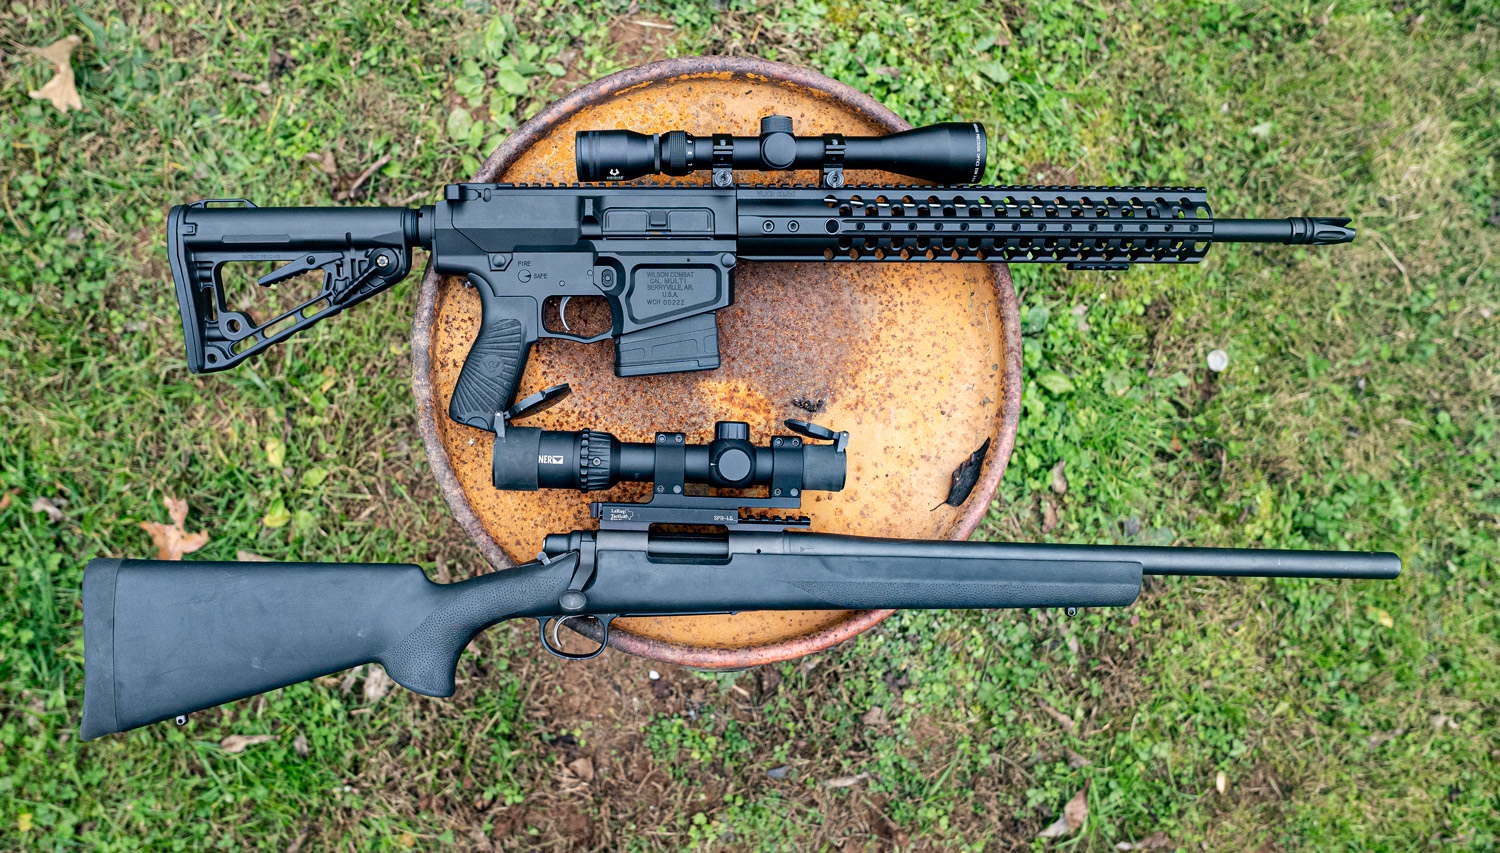 AR-10 and bolt action rifle chambered in .308